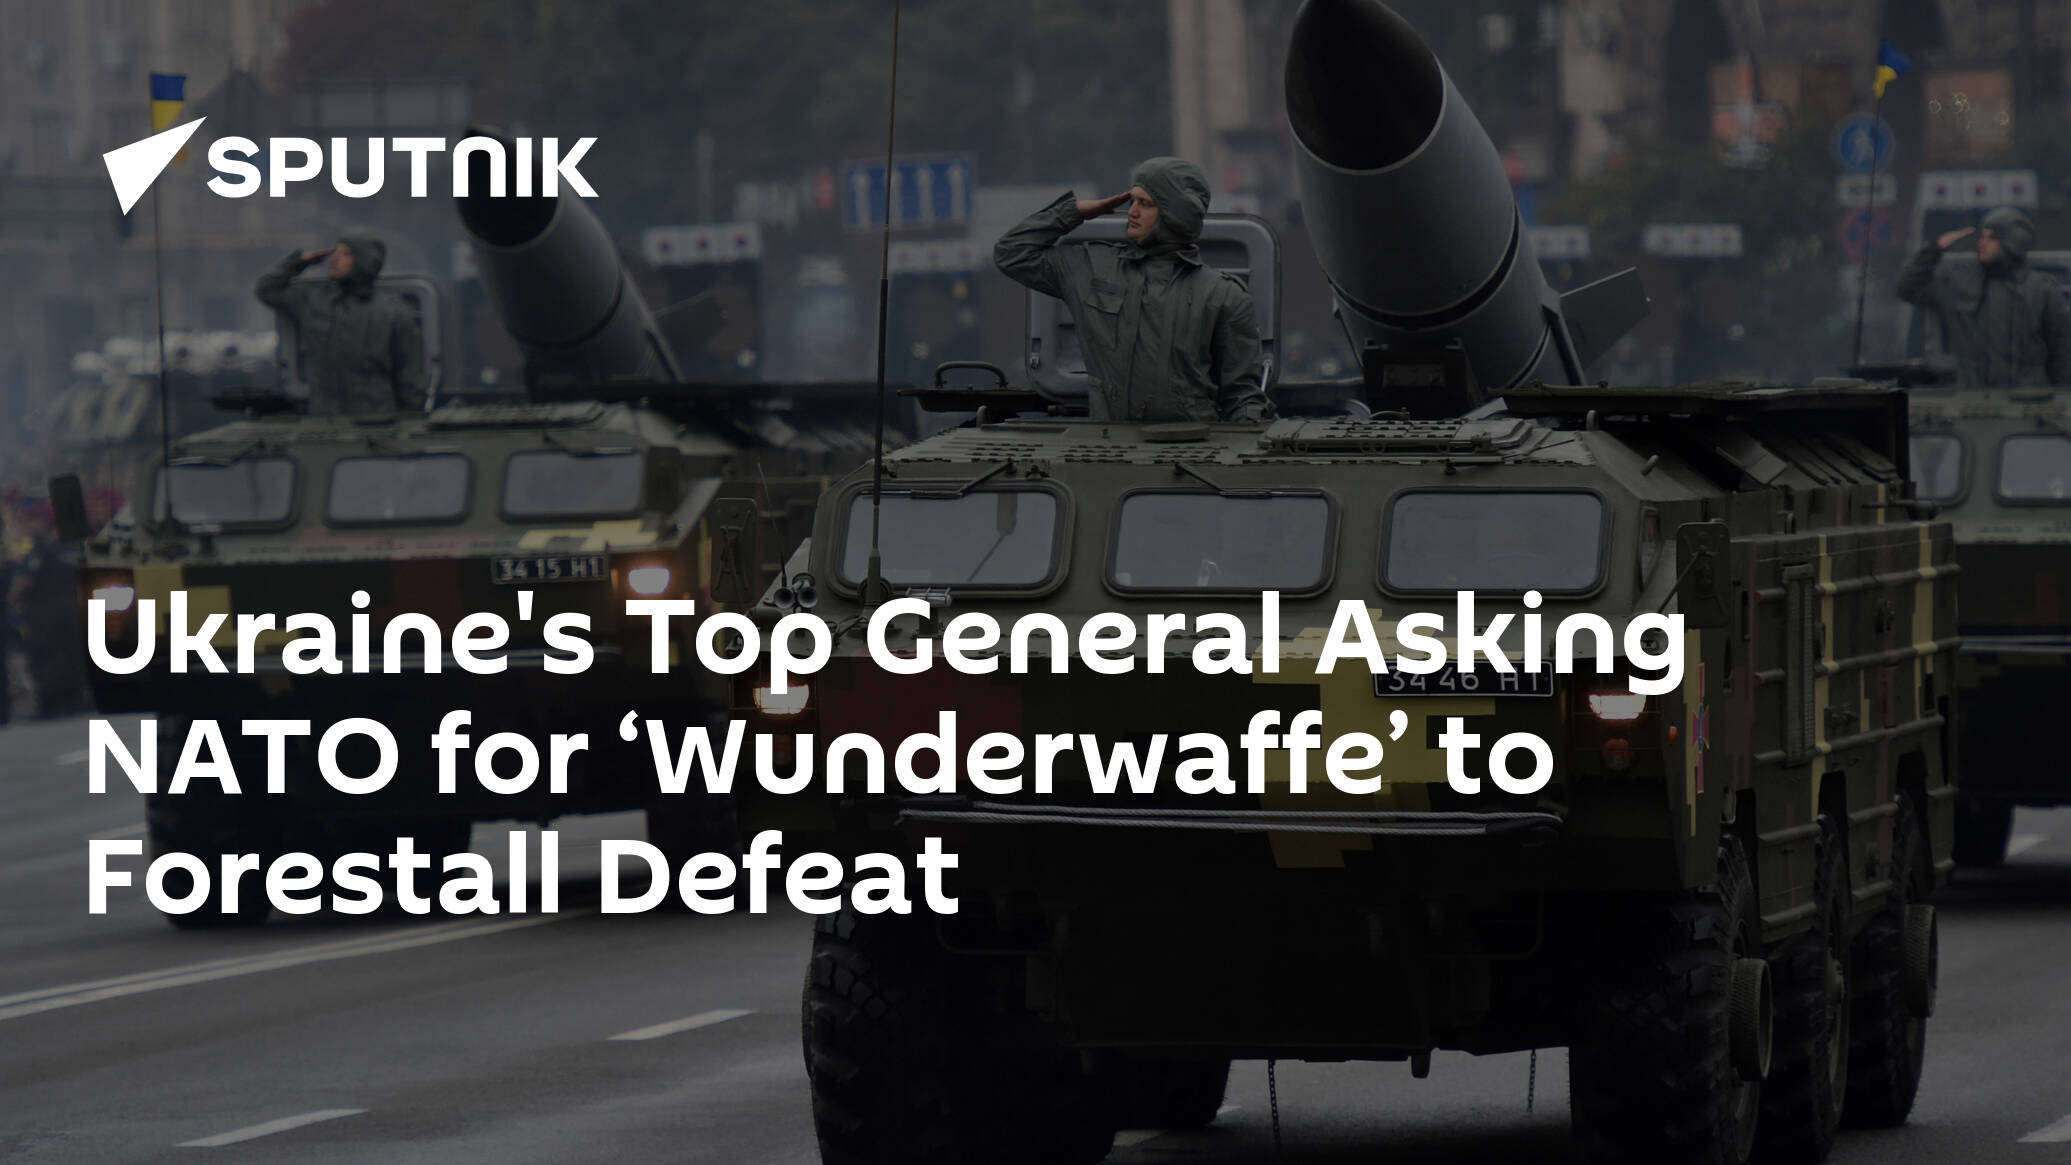 Ukraine's Top General Asking NATO for ‘Wunderwaffe’ to Forestall Defeat